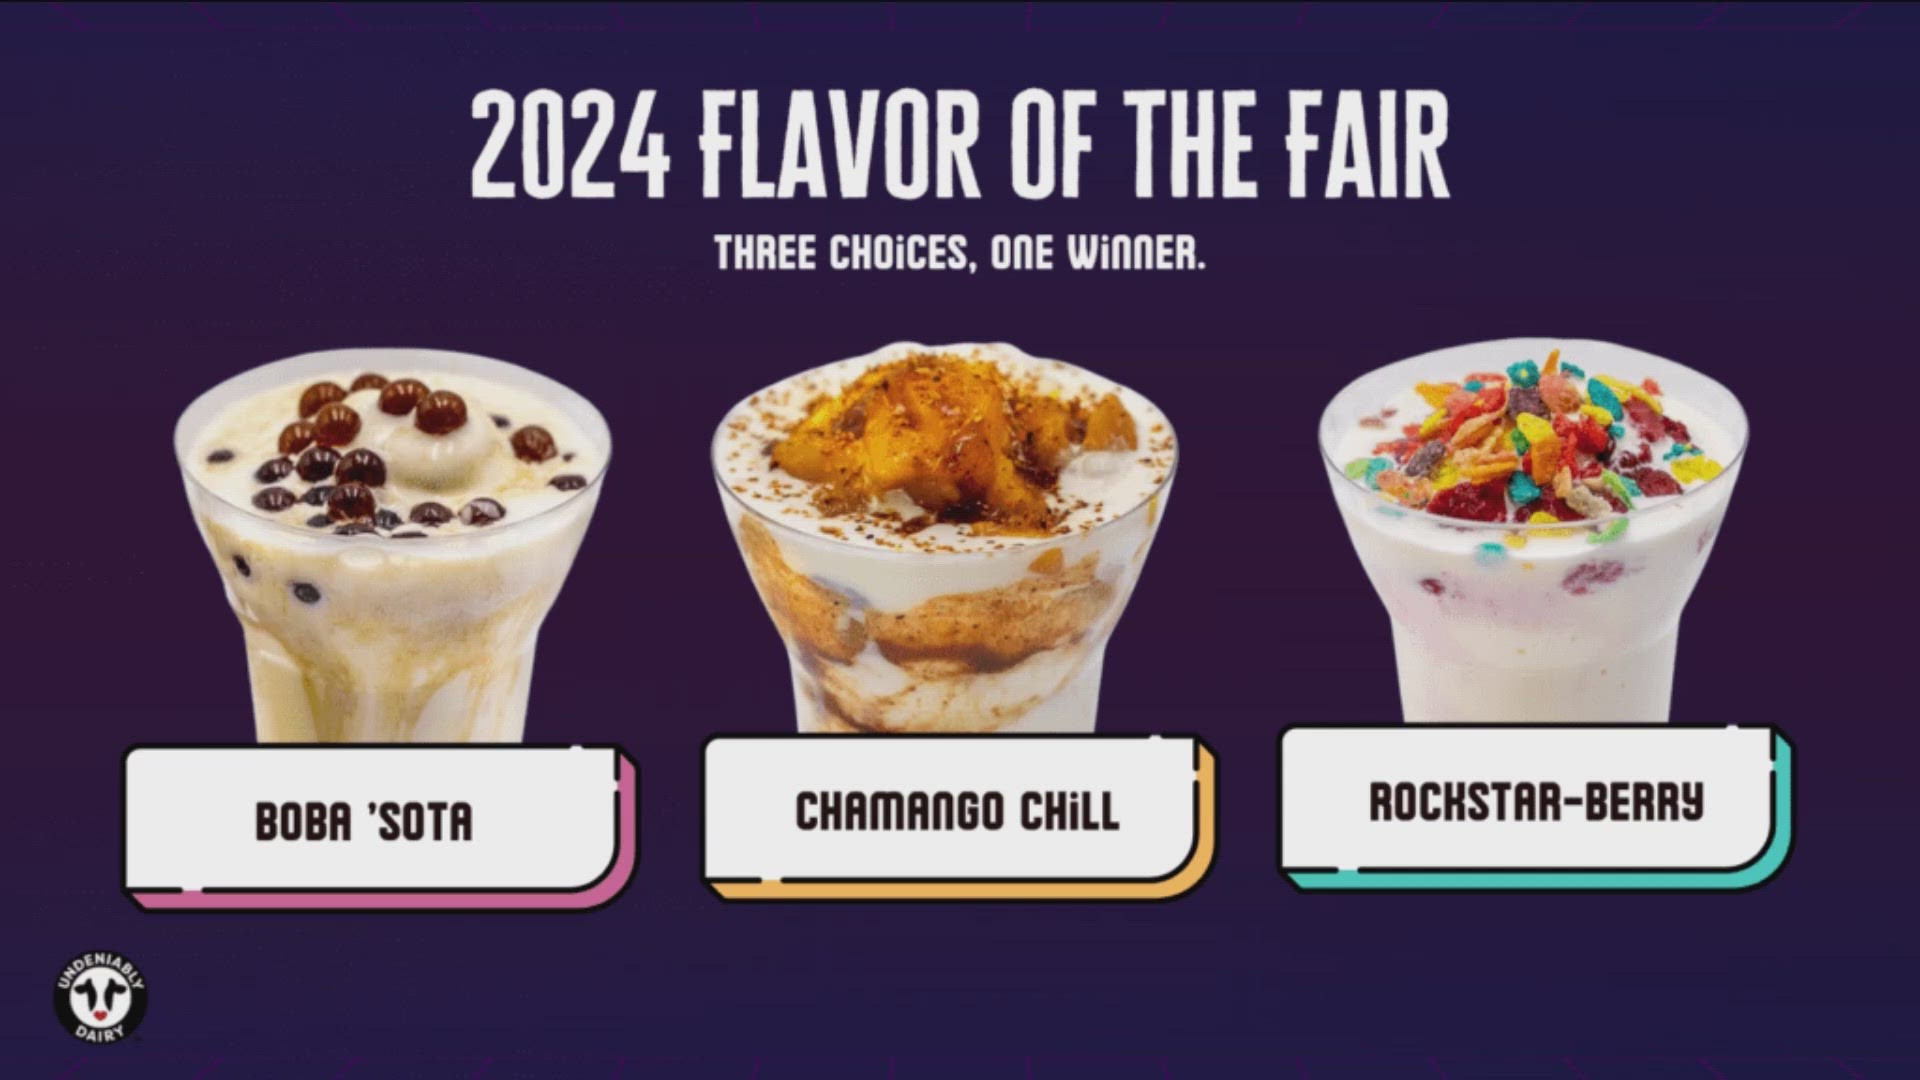 Midwest Dairy is calling on ice cream enthusiasts to vote for one of three offerings that are finalists for this year's official flavor at the Great Minnesota Get-To